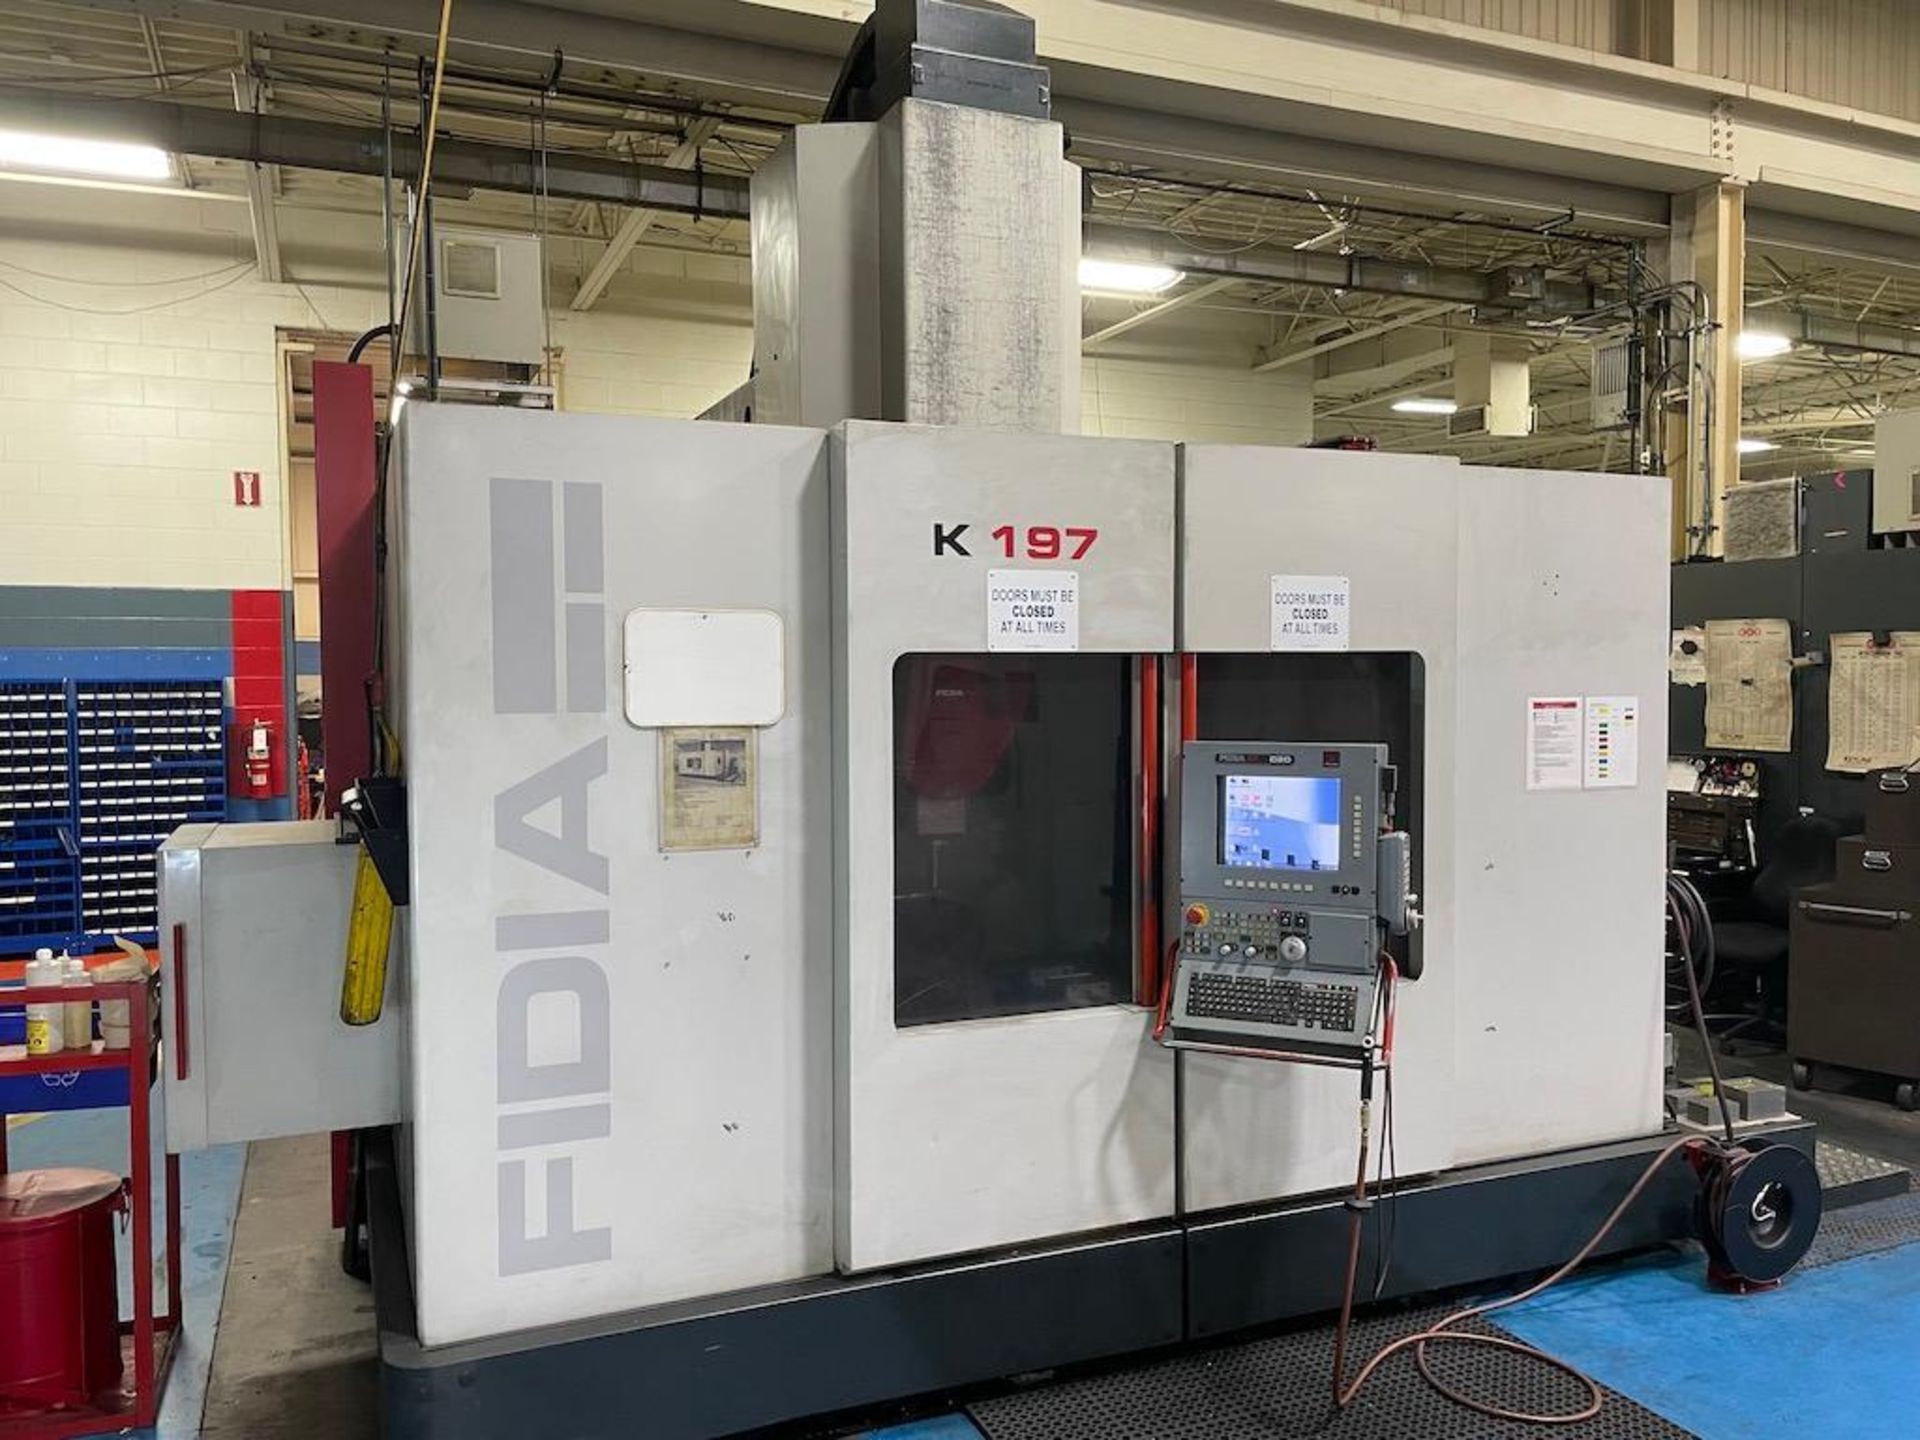 Fidia K197/BHS 5-Axis High Speed CNC Vertical Machining Center, Fidia C20 CNC Control, 2-Axis Contou